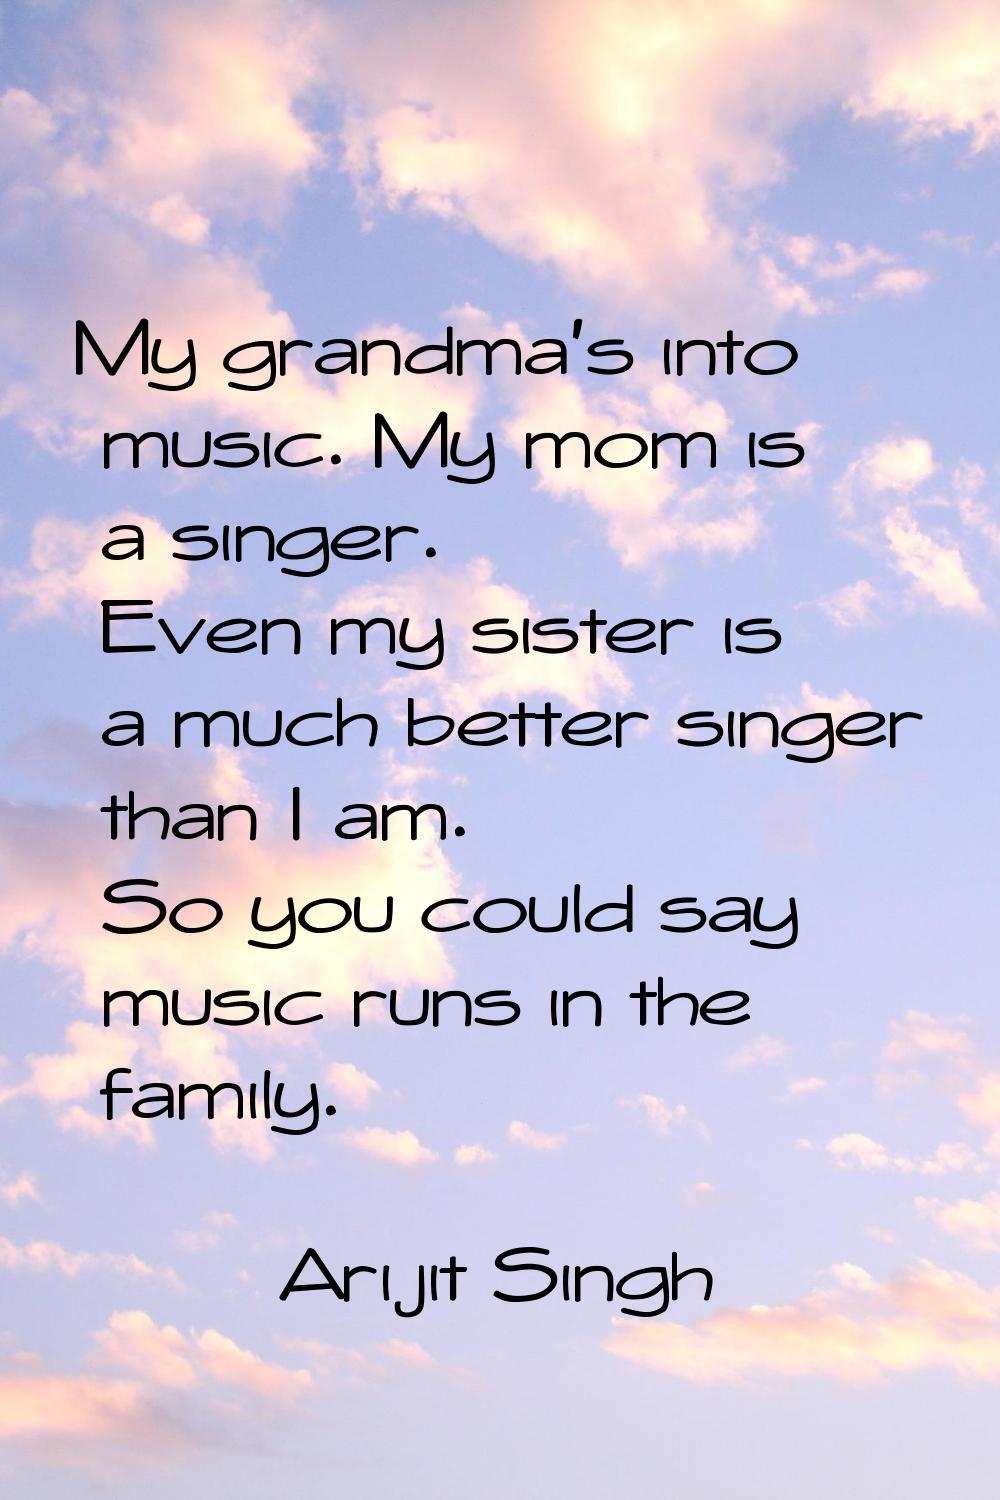 My grandma's into music. My mom is a singer. Even my sister is a much better singer than I am. So y